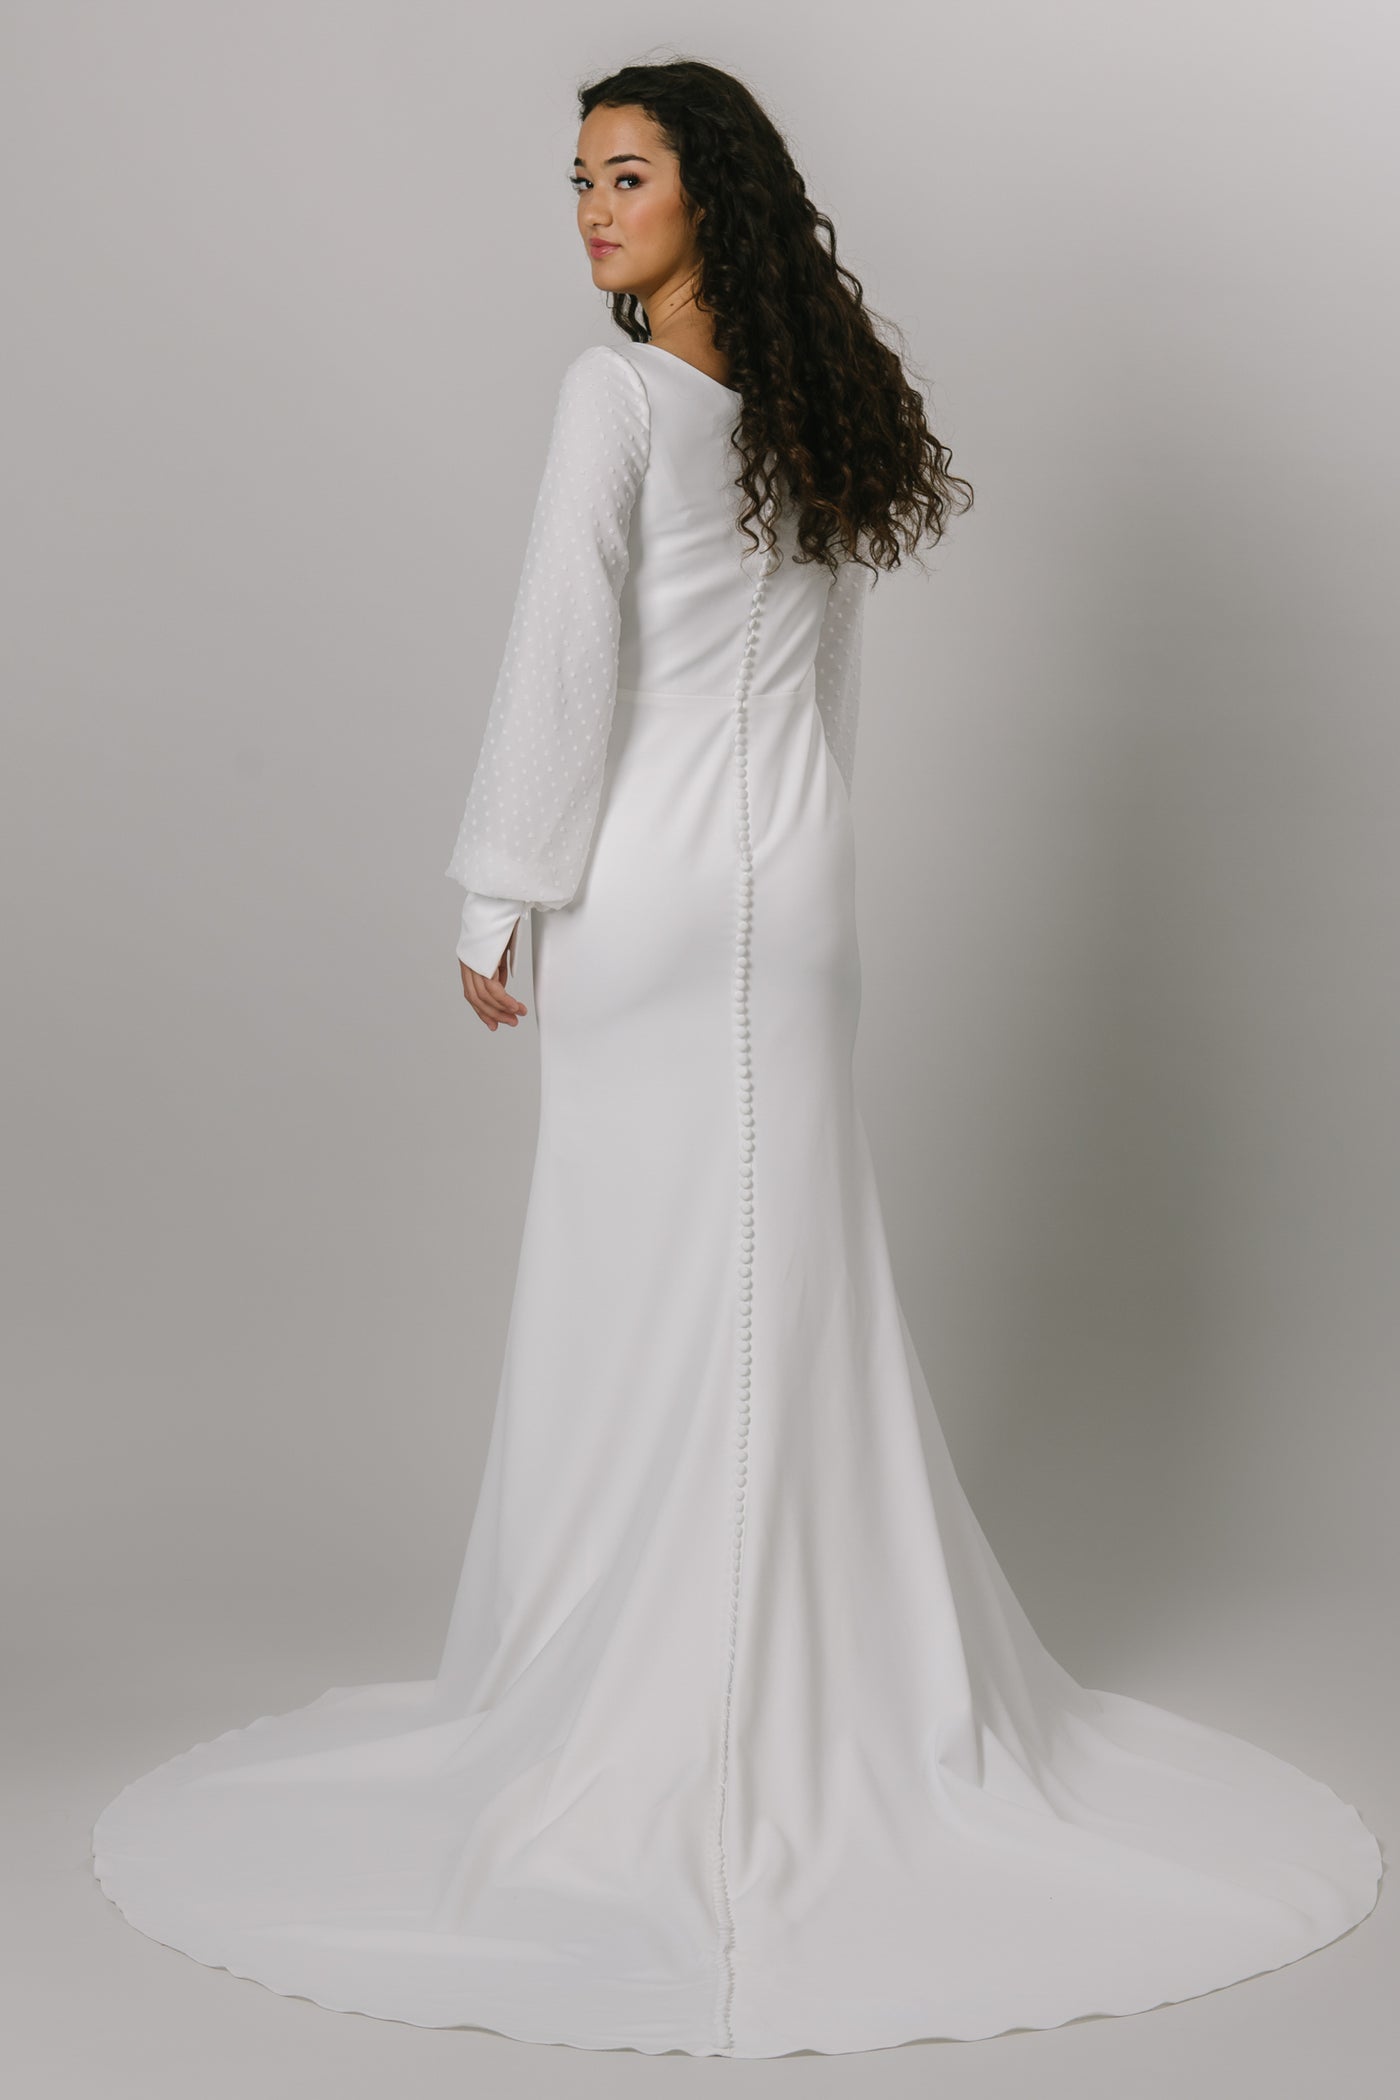 Back shot of our beautiful modest wedding dress with a simple crepe fabric and pattern. The long bishop sleeves have a beautiful swiss dot pattern.